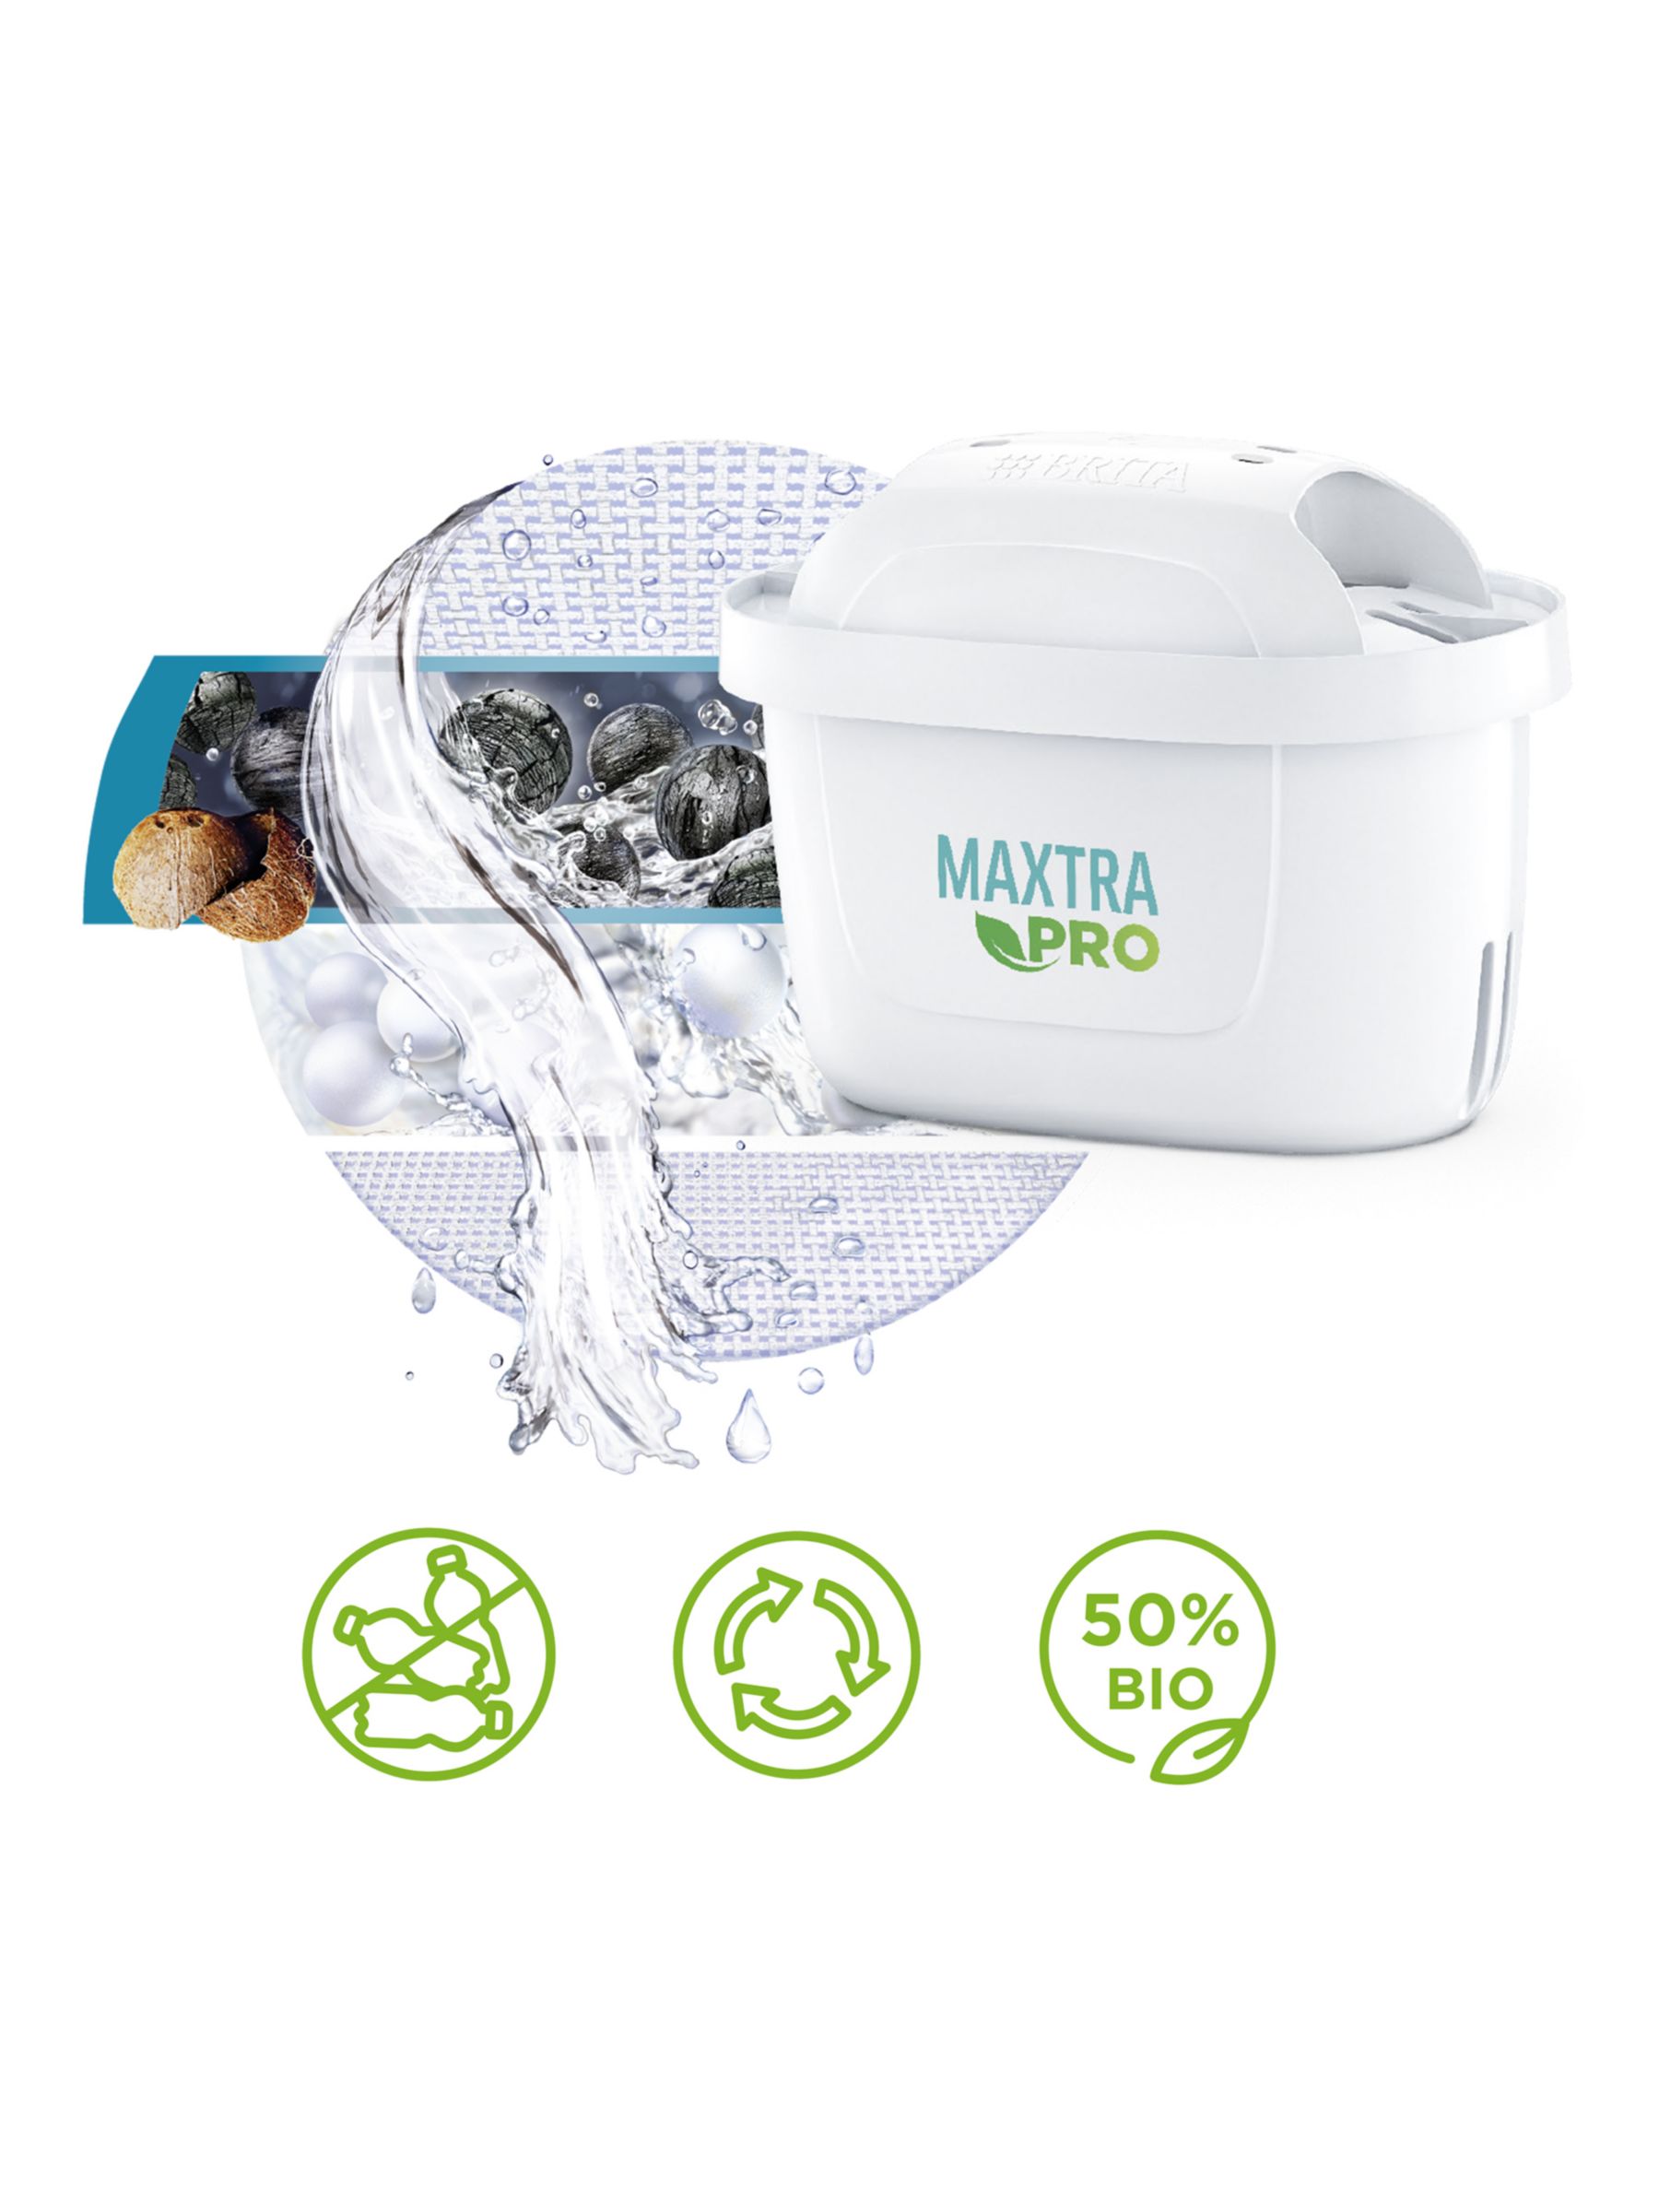 BRITA Maxtra Pro All-In-1 Water Filter Cartridge, Pack of 6